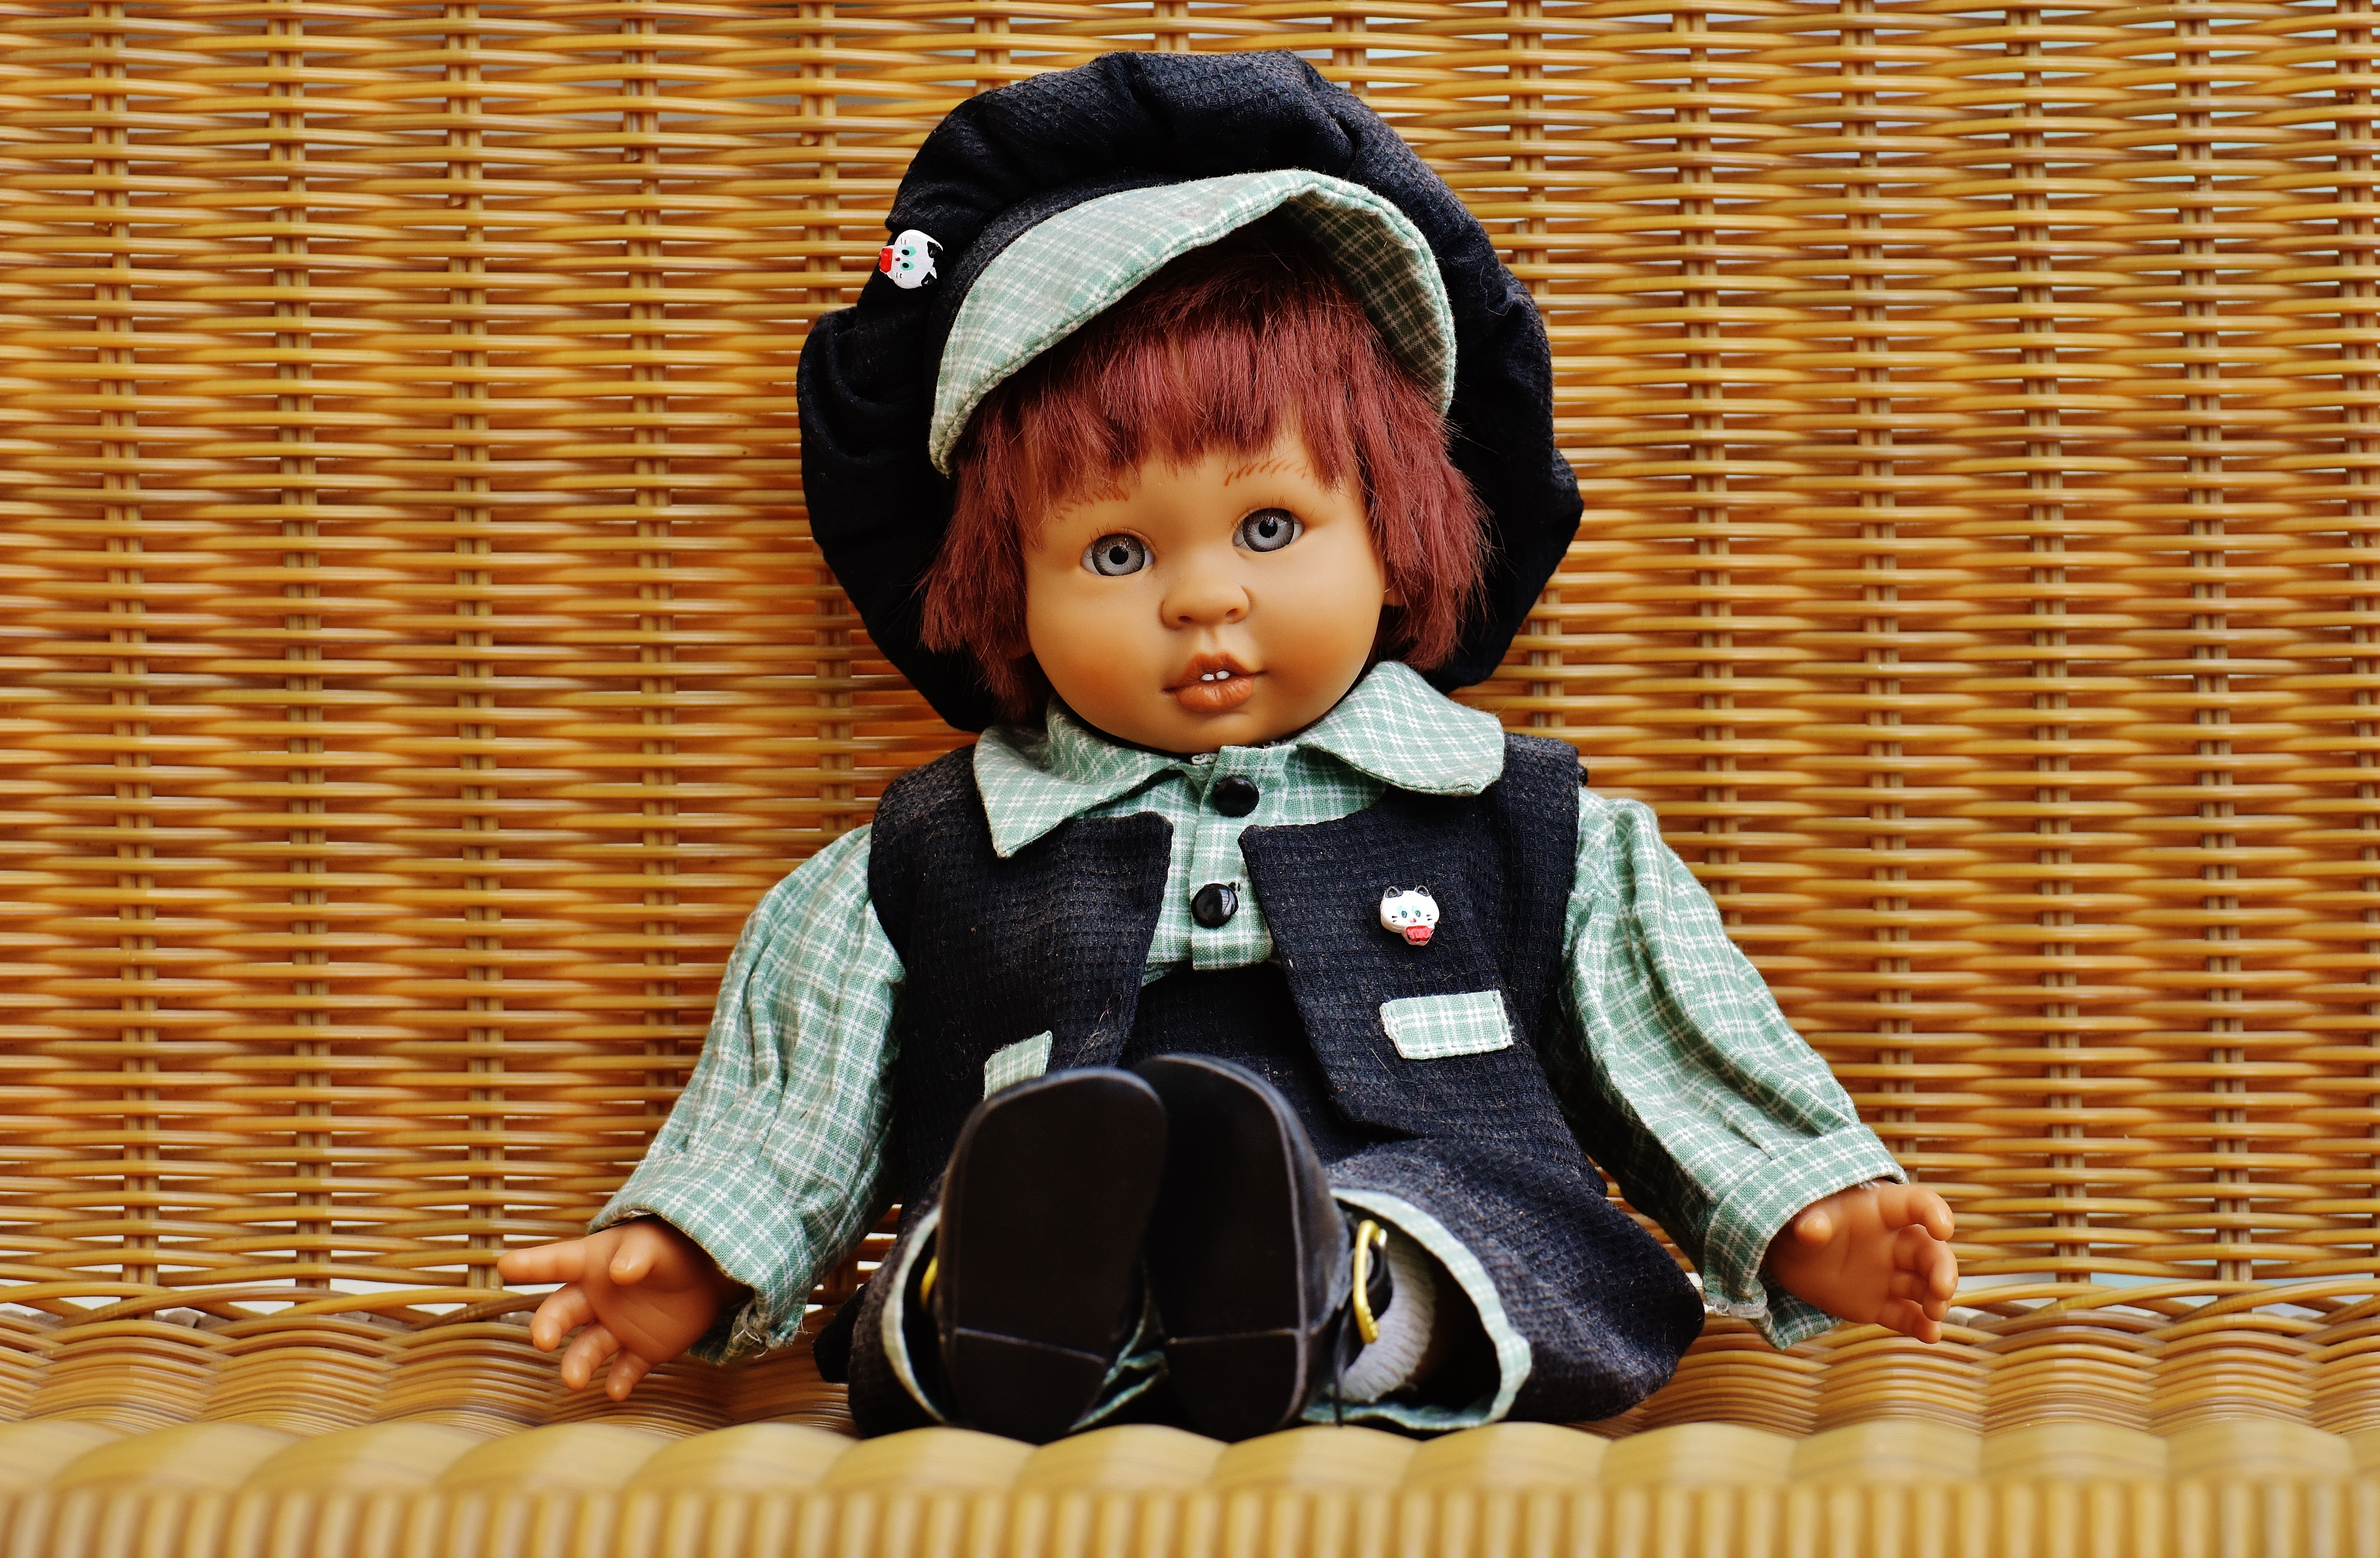 doll in blue and gray vest and dress shirt